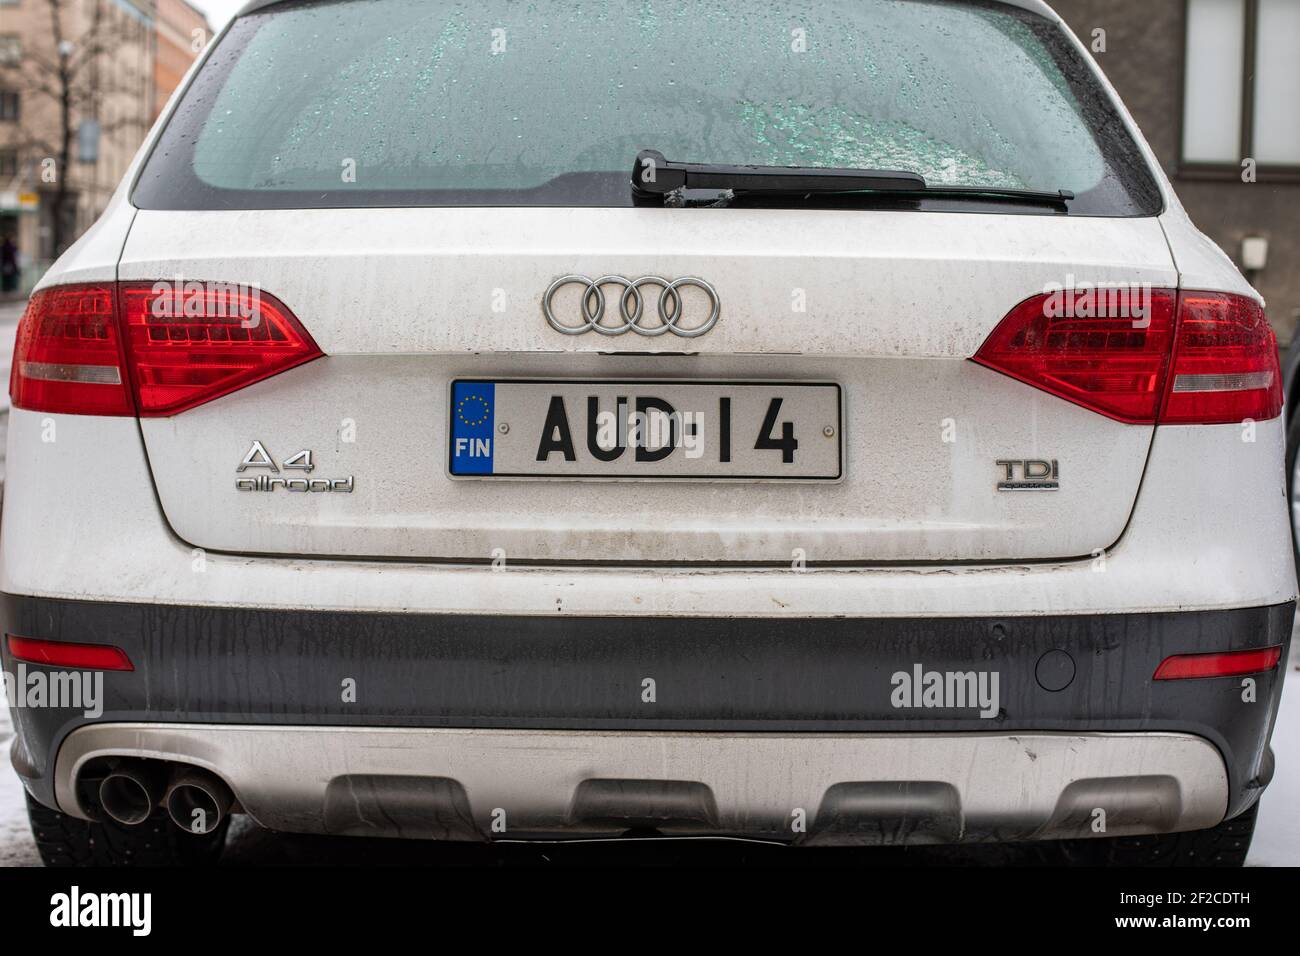 Audi A4 with matching vehicle registration plate or license plate or number plate in Helsinki, Finland Stock Photo